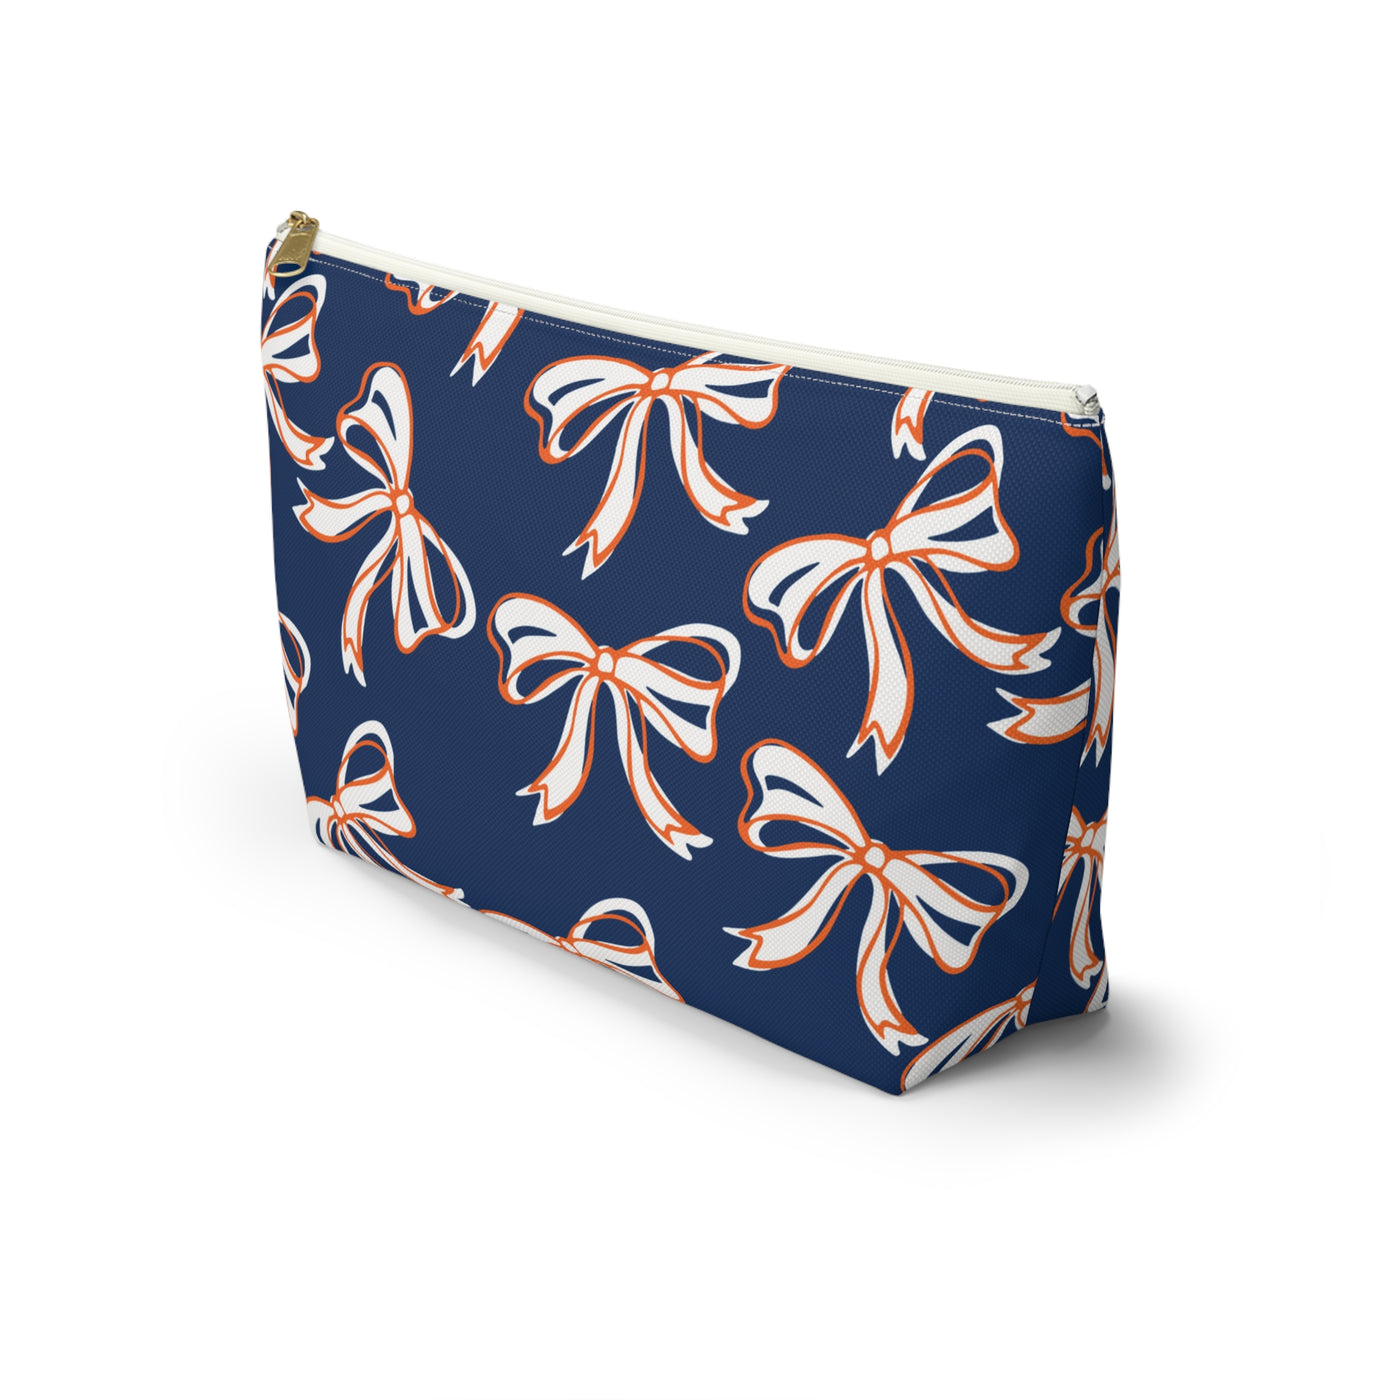 Trendy Bed Party Bow Makeup Bags - Navy & Orange, Bows, Navy Bow, Orange Bow, Bow Gift, Bows - Syracuse, UVA, Bucknell, Auburn, Bow gifts